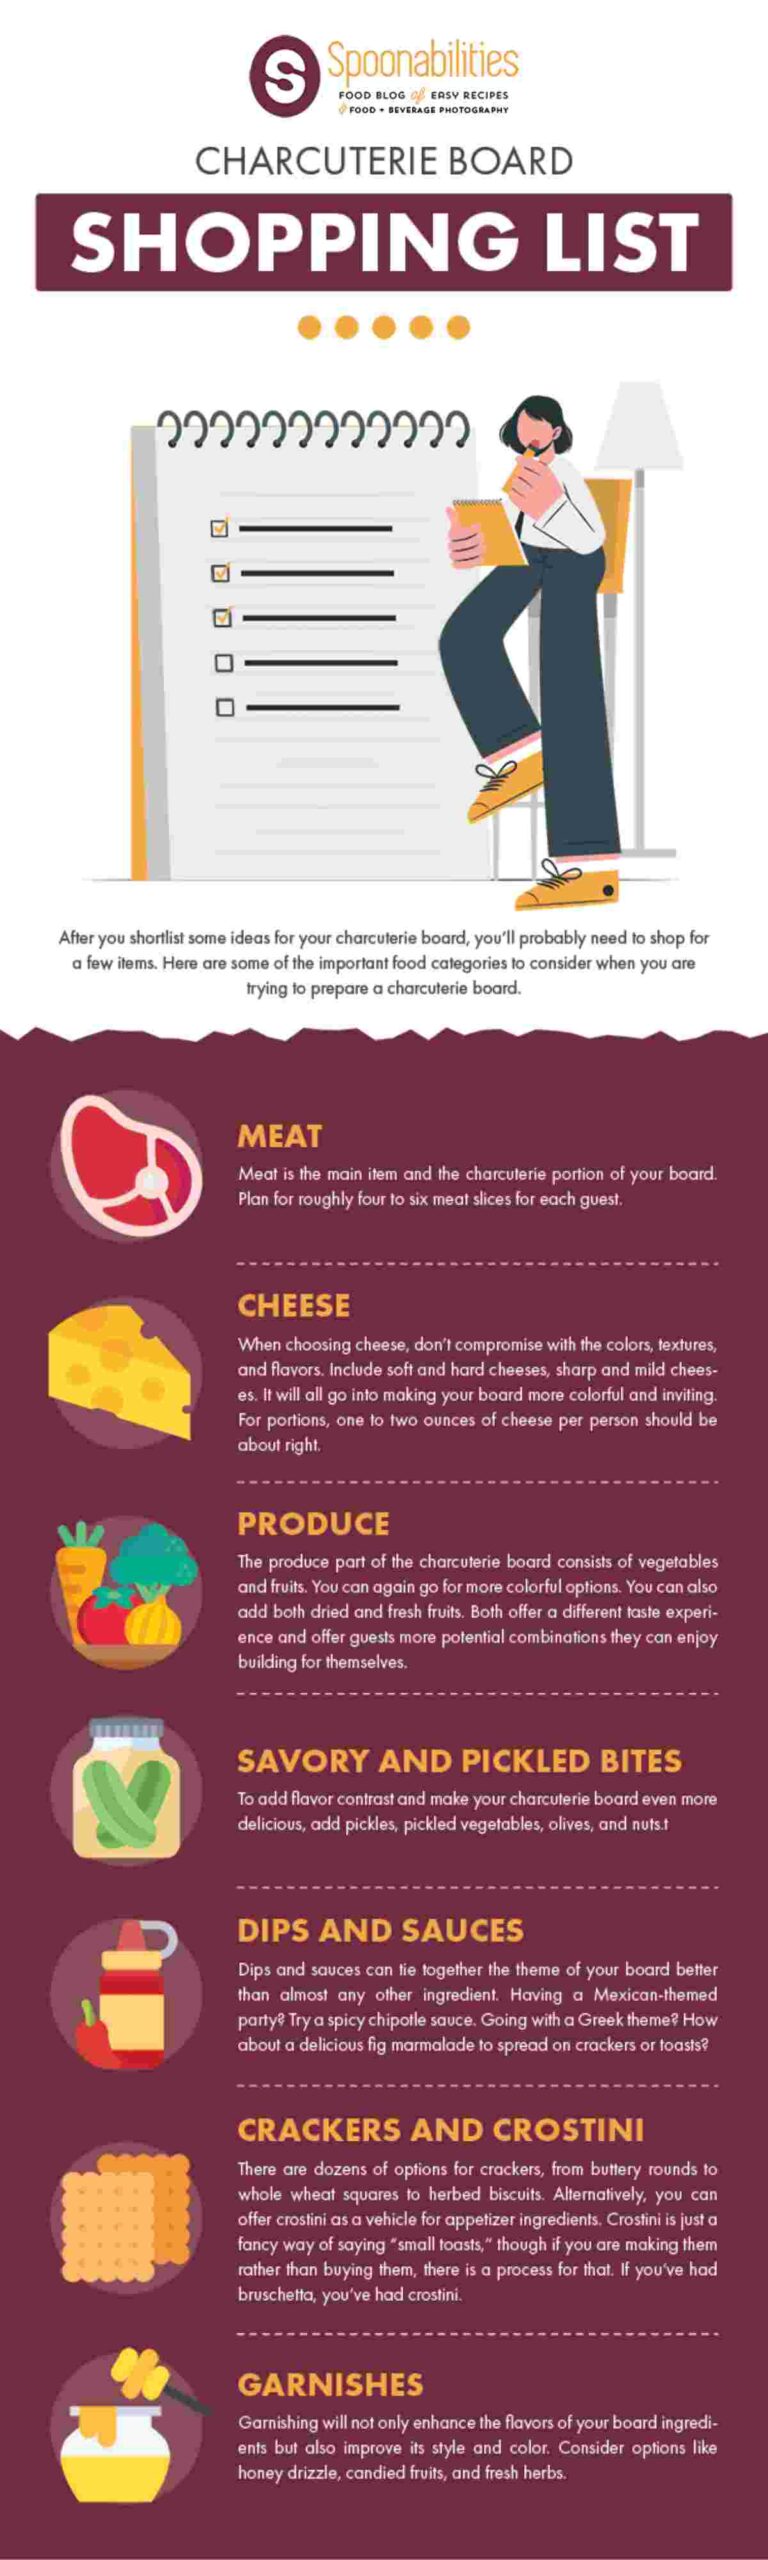 Infographic listing down charcuterie board must haves like meat, cheese, produce, dips, etc.